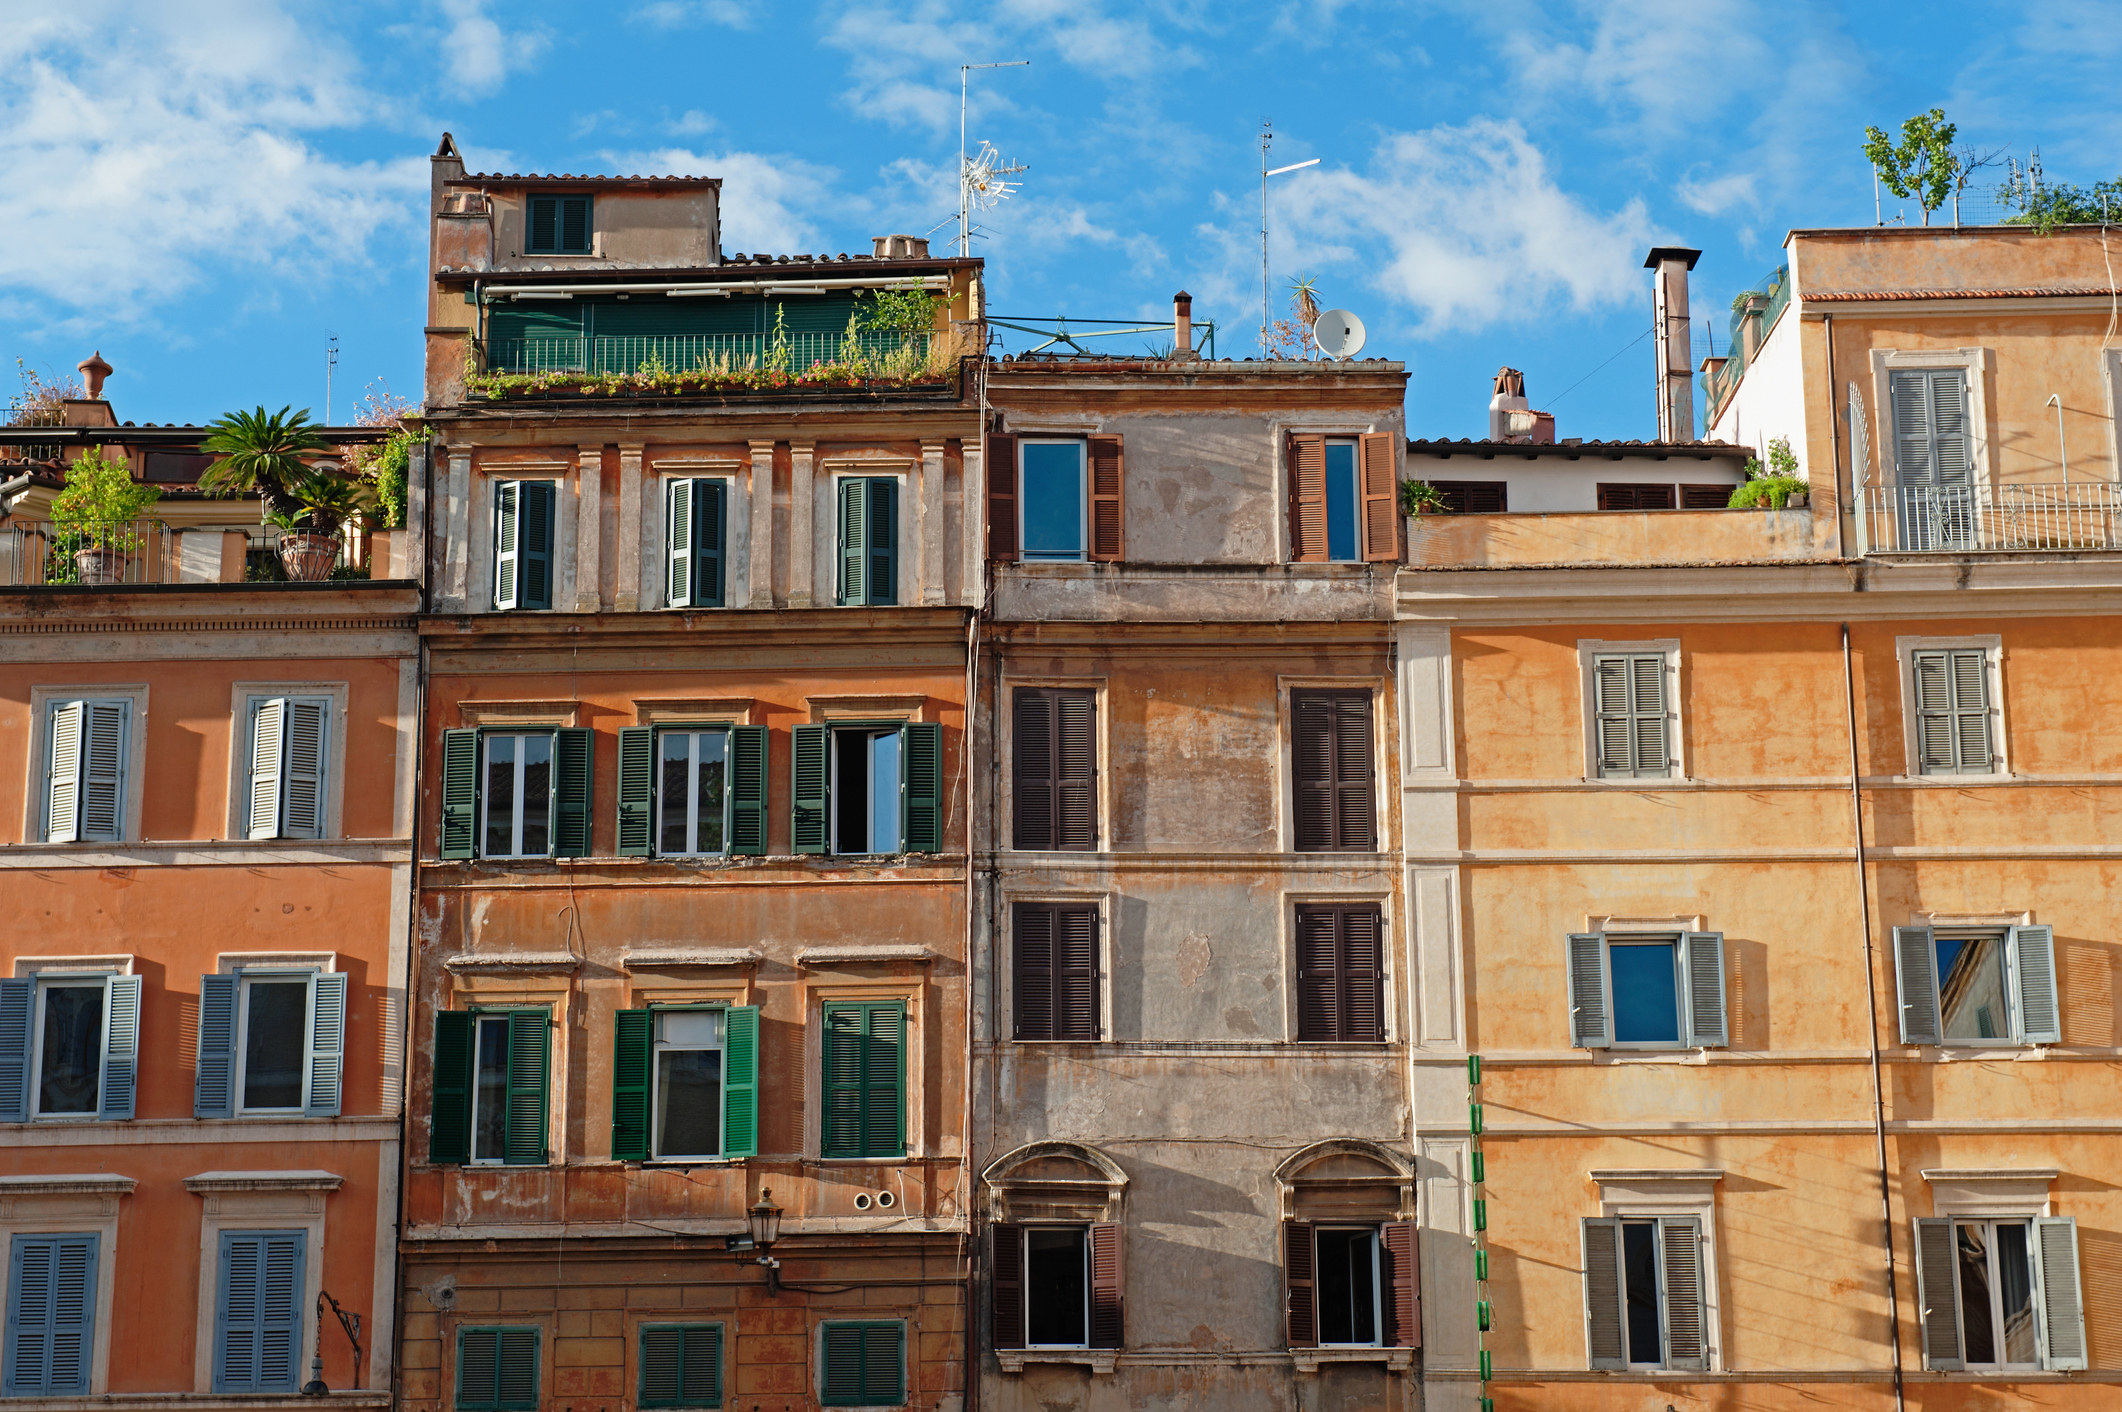 Old colorful buildings in Rome.